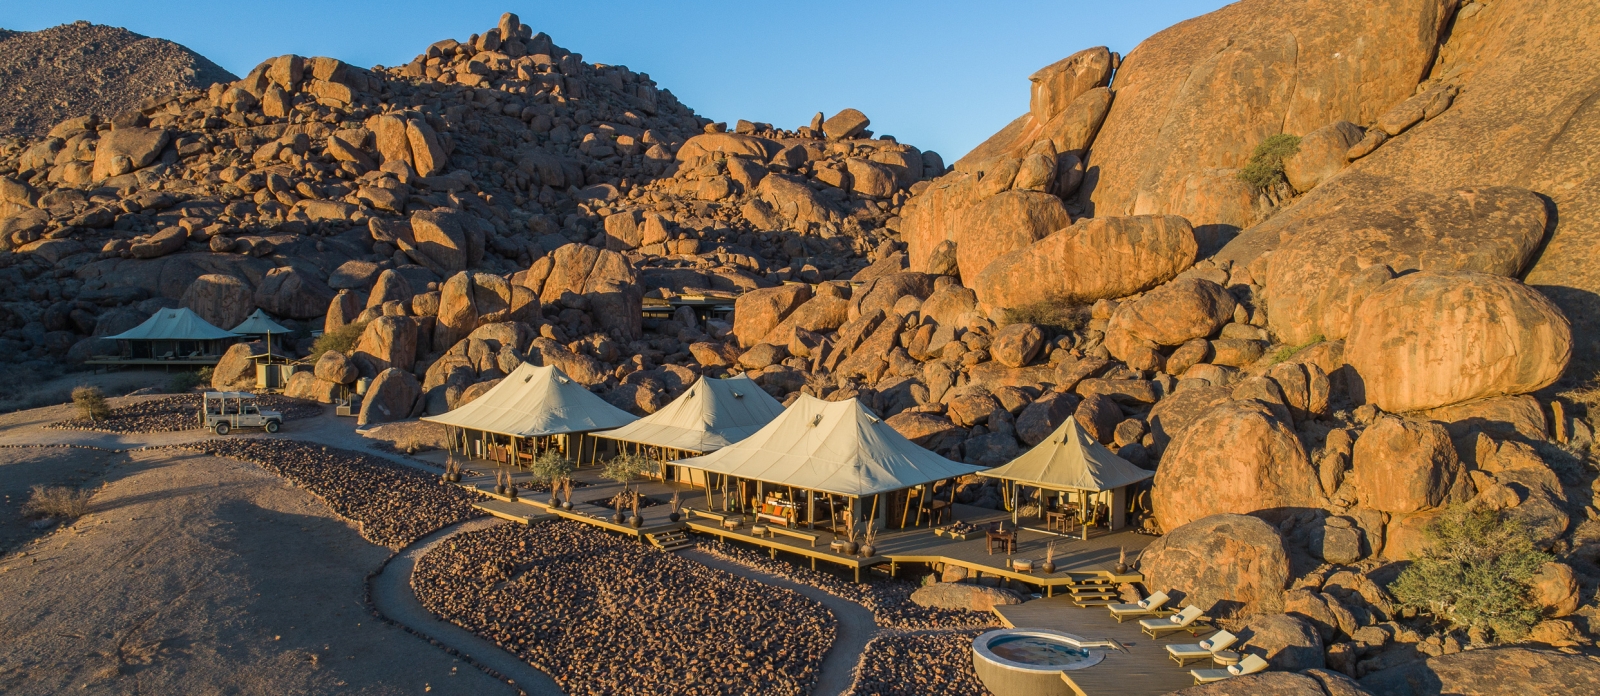 Aerial view of the camp set against boulders at sunset